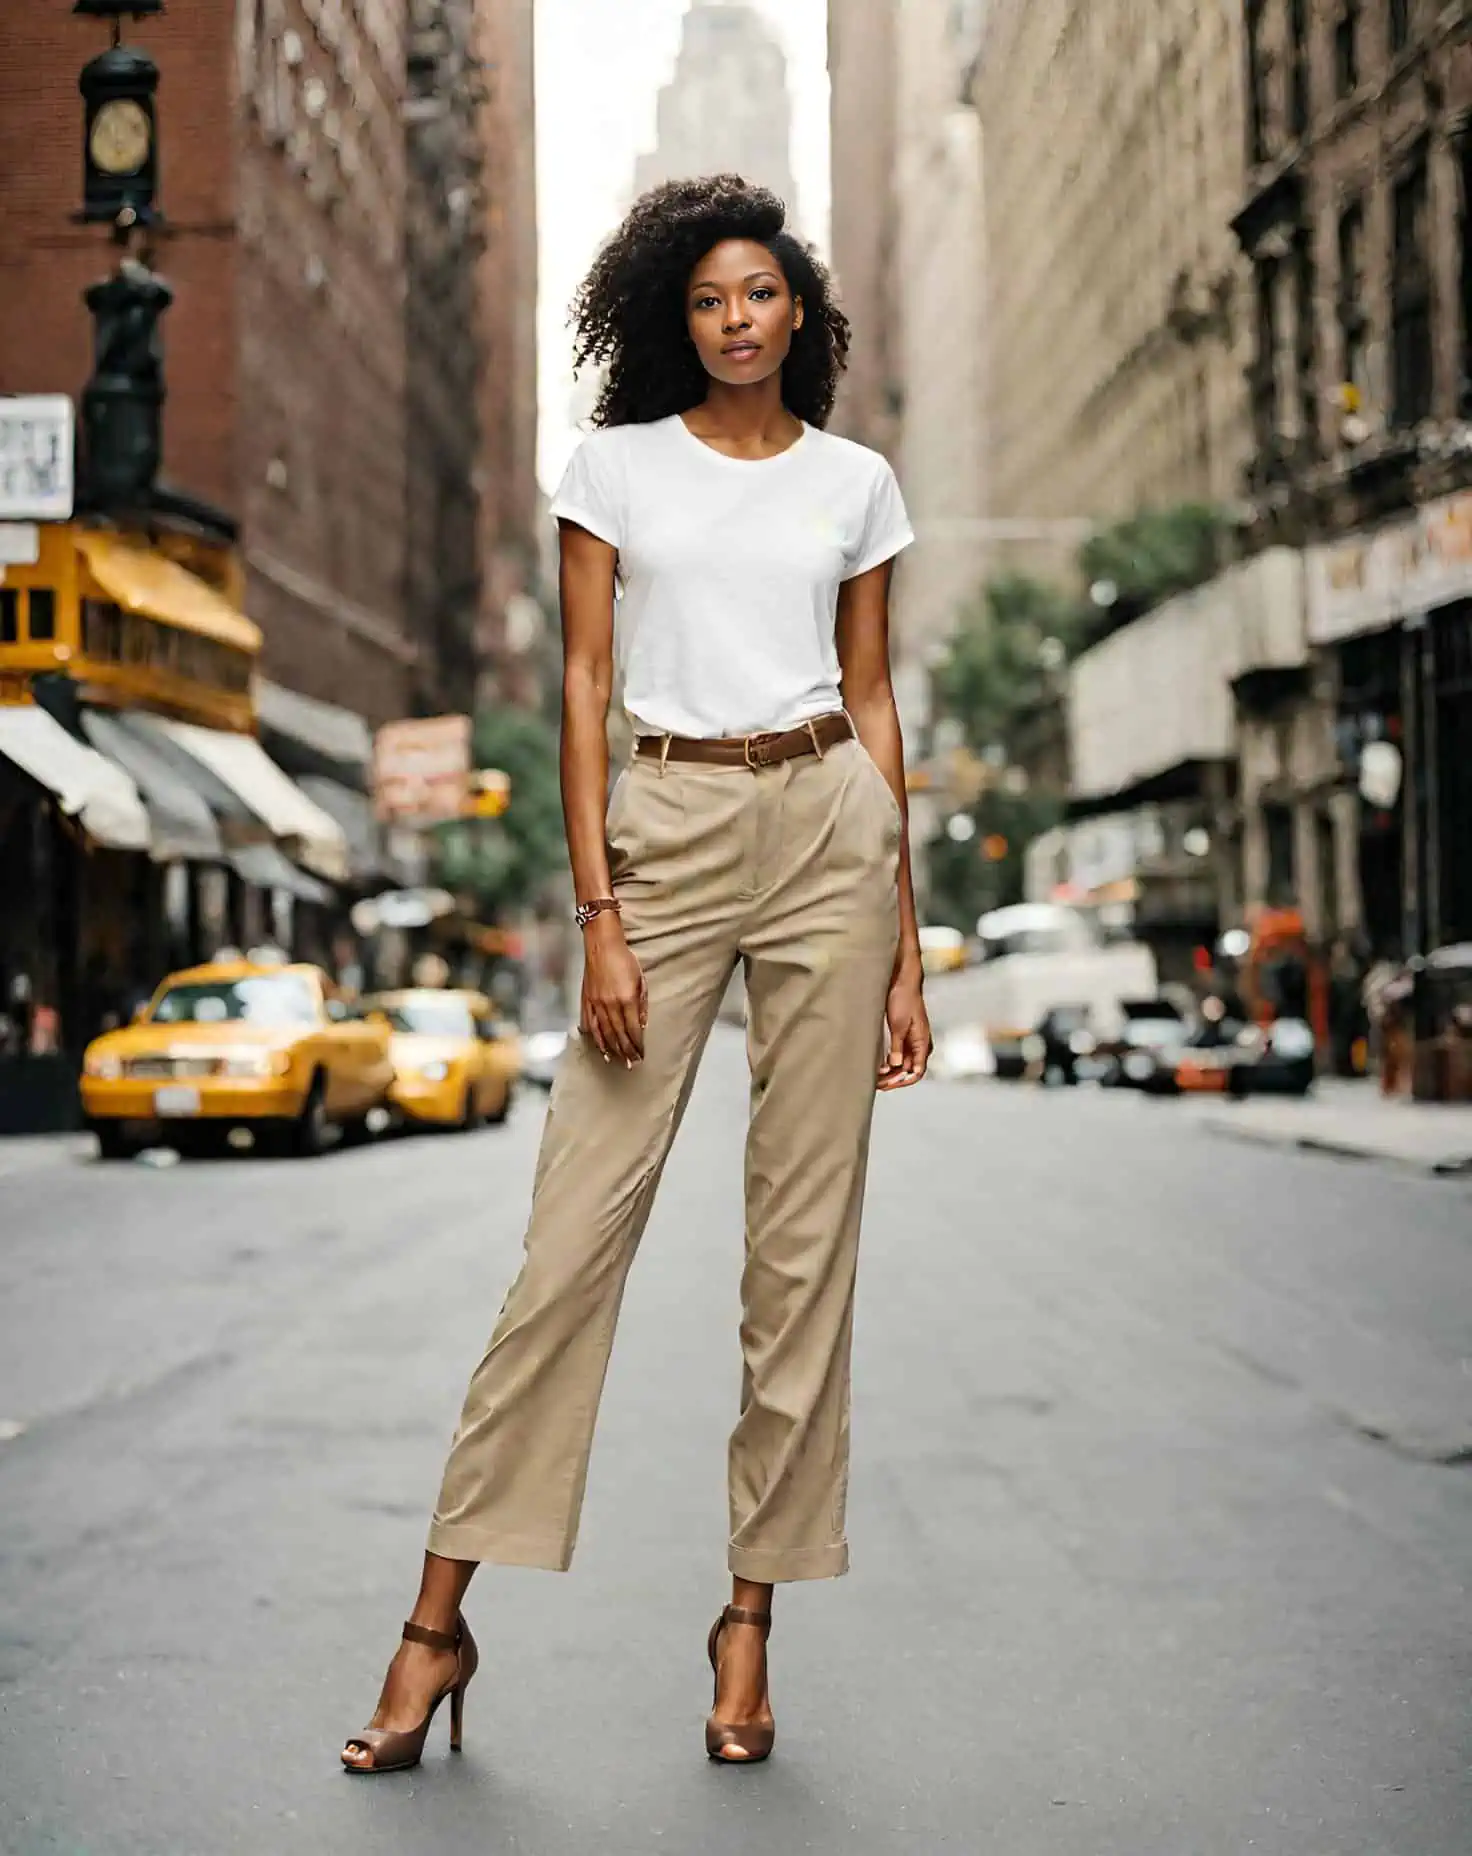 https://blog.petitedressing.com/wp-content/uploads/2024/02/white-shirt-with-belt-and-chino-pants-and-heels.webp